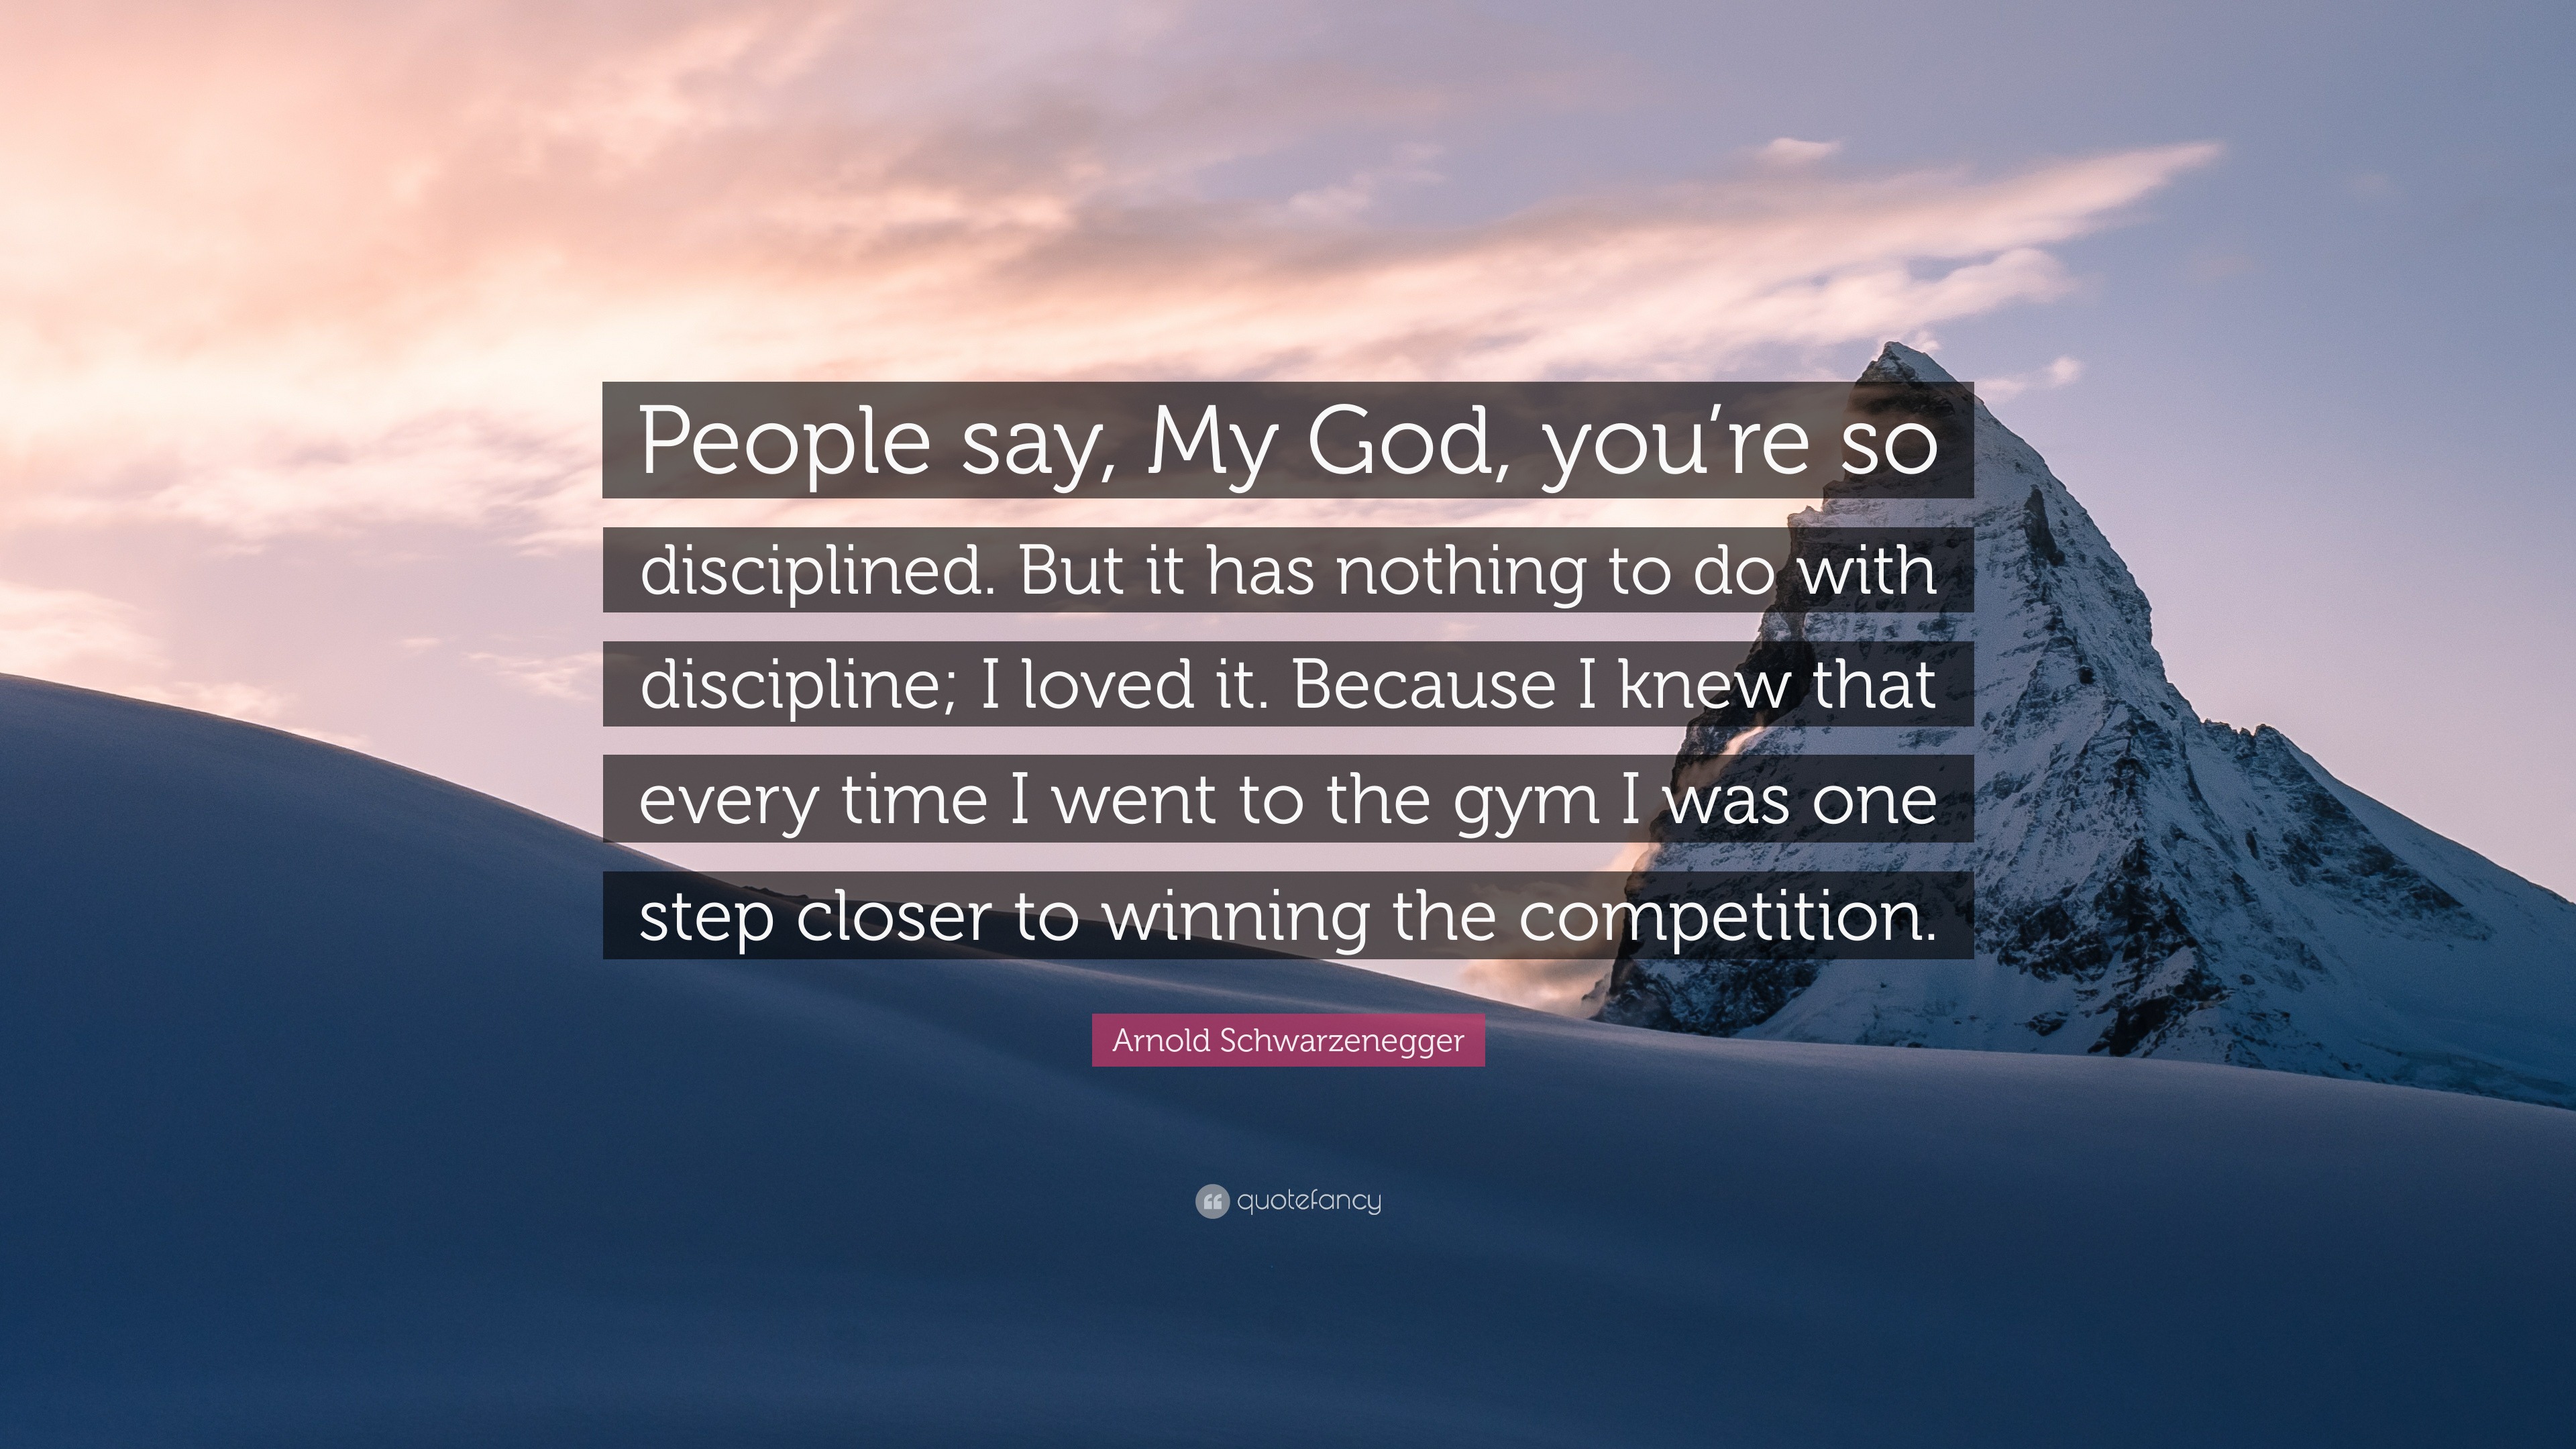 Arnold Schwarzenegger Quote People Say My God You Re So Disciplined But It Has Nothing To Do With Discipline I Loved It Because I Knew That Eve